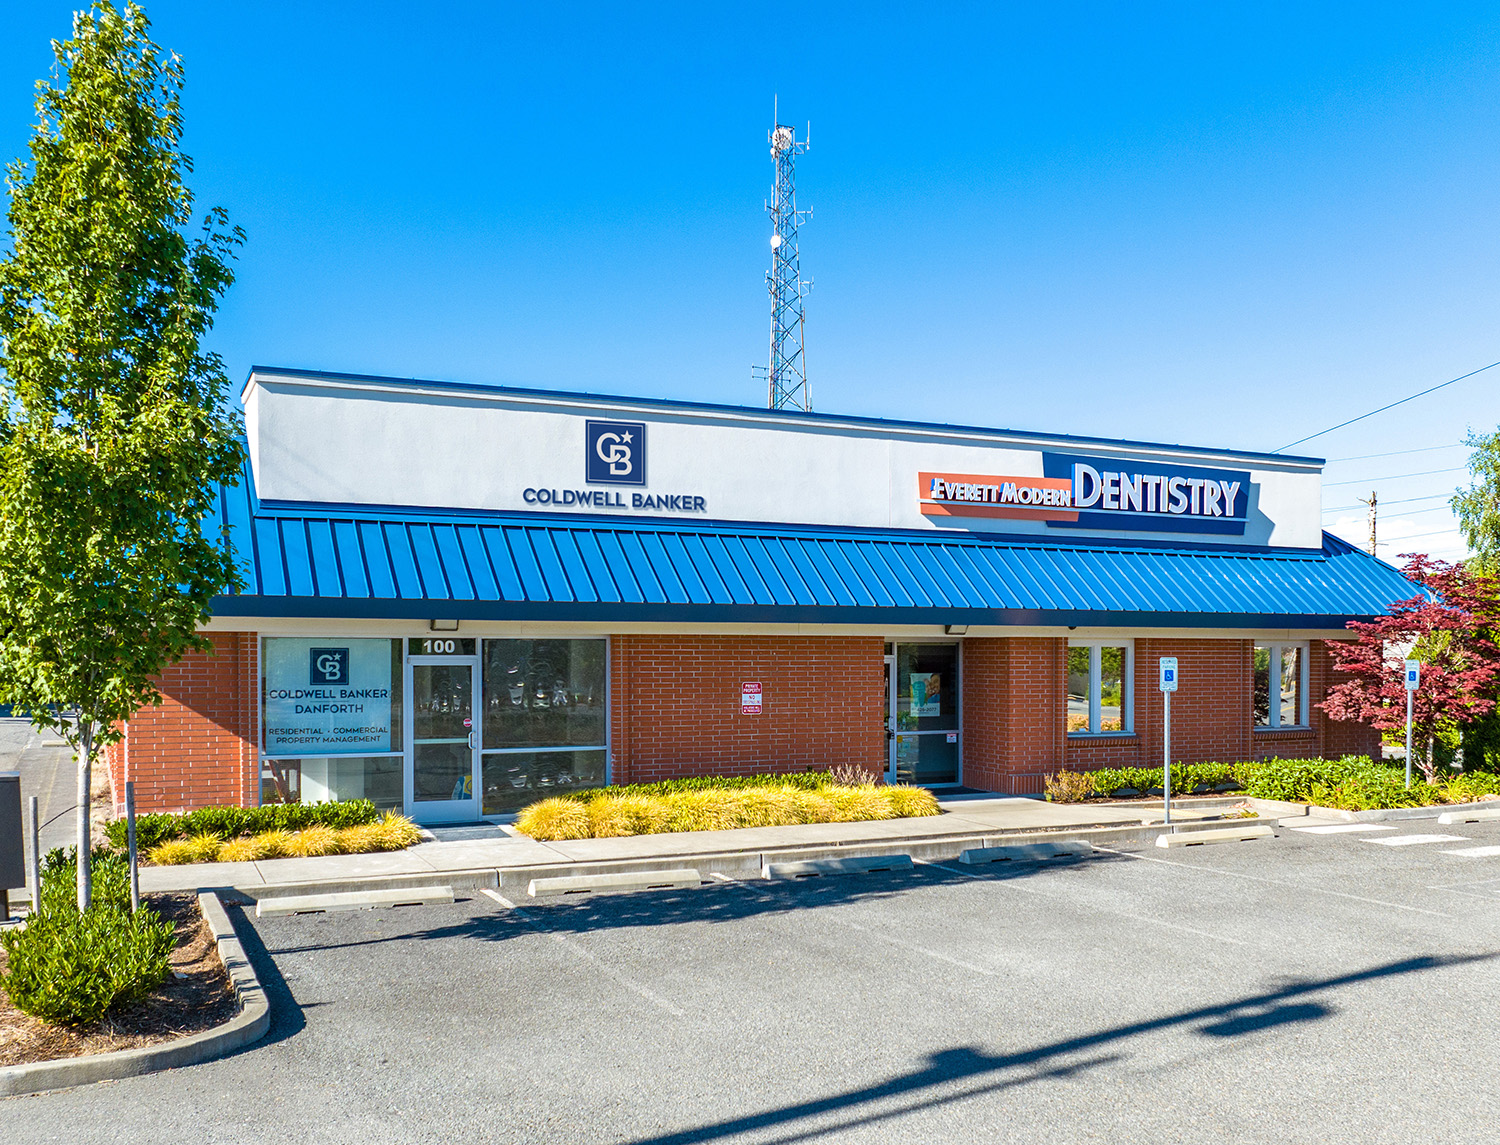 Hanley Investment Group Arranges Sale of Two-Tenant Pacific Dental Services and Coldwell Banker Pad in Seattle Metro for $2.8 Million